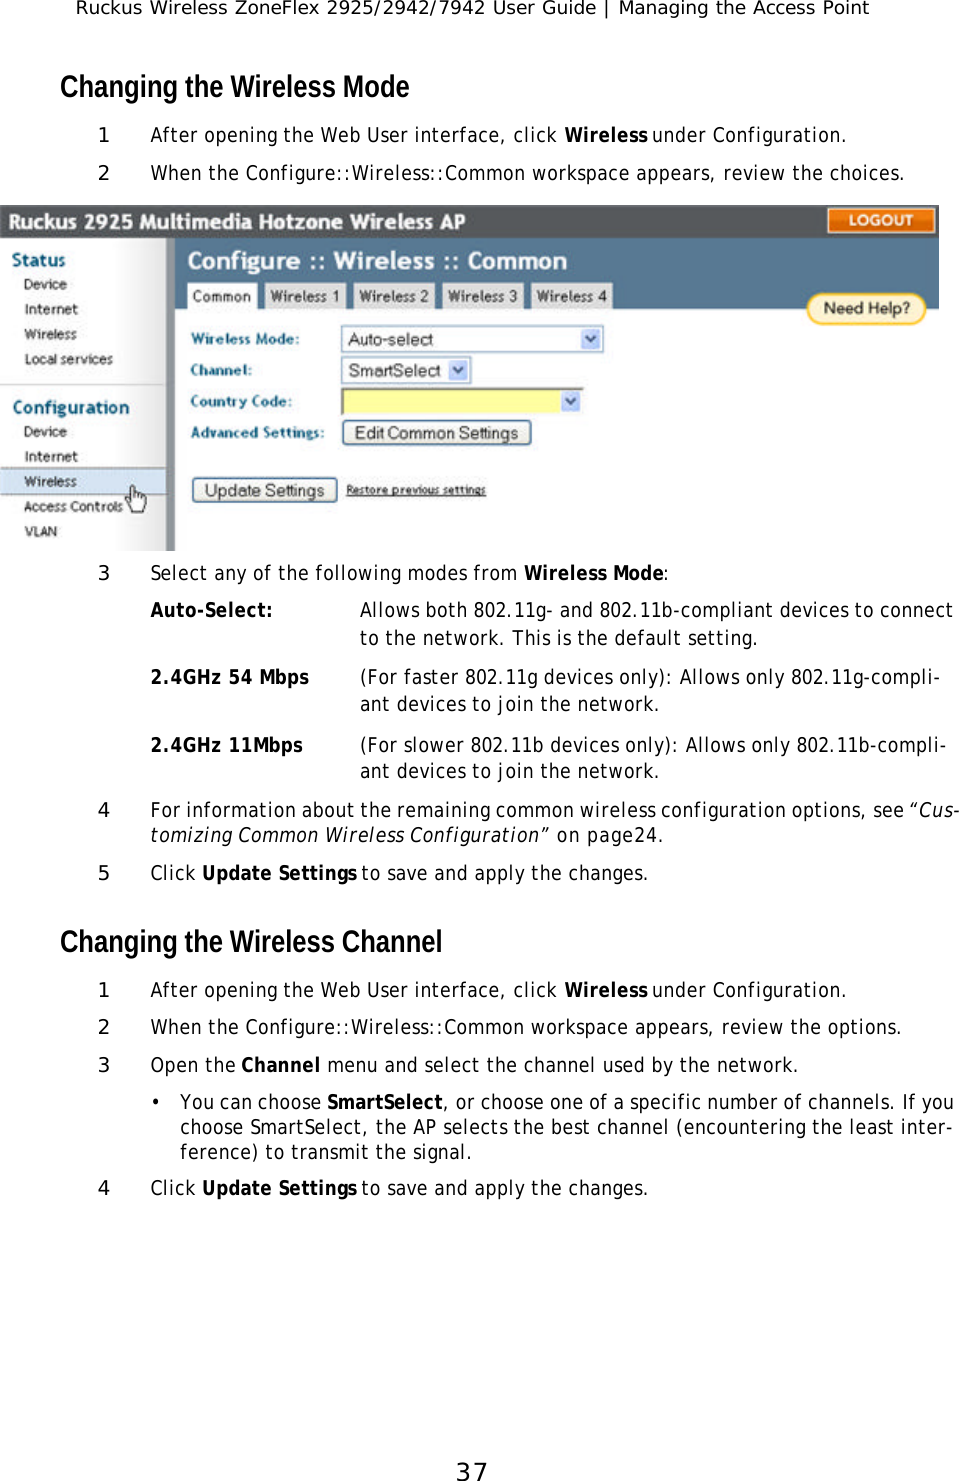 Ruckus Wireless ZoneFlex 2925/2942/7942 User Guide | Managing the Access Point37Changing the Wireless Mode1After opening the Web User interface, click Wireless under Configuration.2When the Configure::Wireless::Common workspace appears, review the choices.3Select any of the following modes from Wireless Mode:Auto-Select: Allows both 802.11g- and 802.11b-compliant devices to connect to the network. This is the default setting.2.4GHz 54 Mbps (For faster 802.11g devices only): Allows only 802.11g-compli-ant devices to join the network.2.4GHz 11Mbps  (For slower 802.11b devices only): Allows only 802.11b-compli-ant devices to join the network.4For information about the remaining common wireless configuration options, see “Cus-tomizing Common Wireless Configuration” on page24. 5Click Update Settings to save and apply the changes.Changing the Wireless Channel1After opening the Web User interface, click Wireless under Configuration.2When the Configure::Wireless::Common workspace appears, review the options.3Open the Channel menu and select the channel used by the network. •You can choose SmartSelect, or choose one of a specific number of channels. If you choose SmartSelect, the AP selects the best channel (encountering the least inter-ference) to transmit the signal.4Click Update Settings to save and apply the changes.